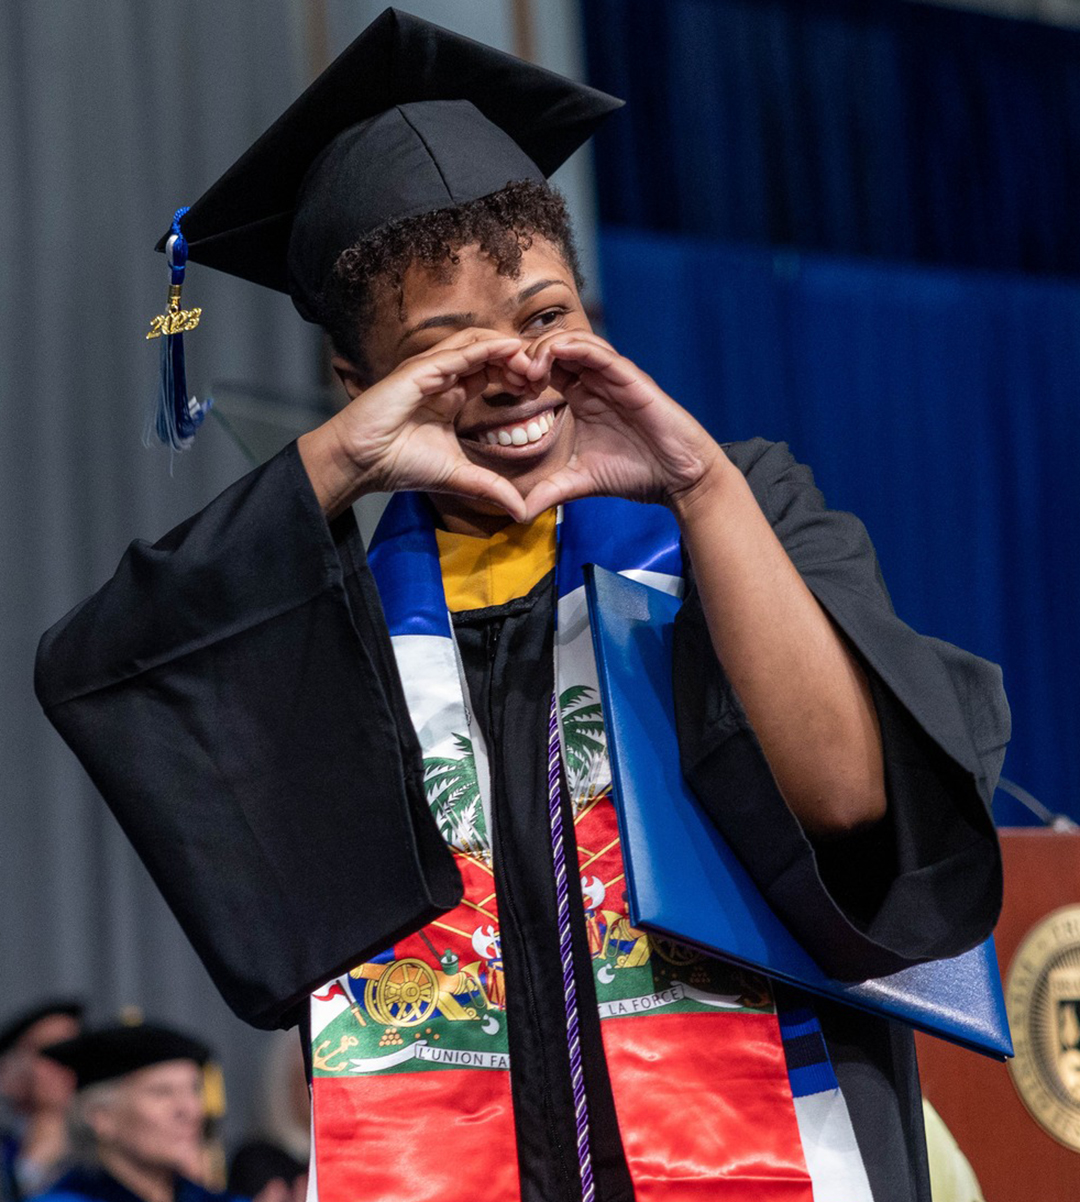 Brandeis University student speaker Nathalie Vieux-Gresham makes the shape of a heart to her fellow graduates after walking across the stage during the undergraduate Commencement ceremony at the Gosman Sports and Convocation Center.